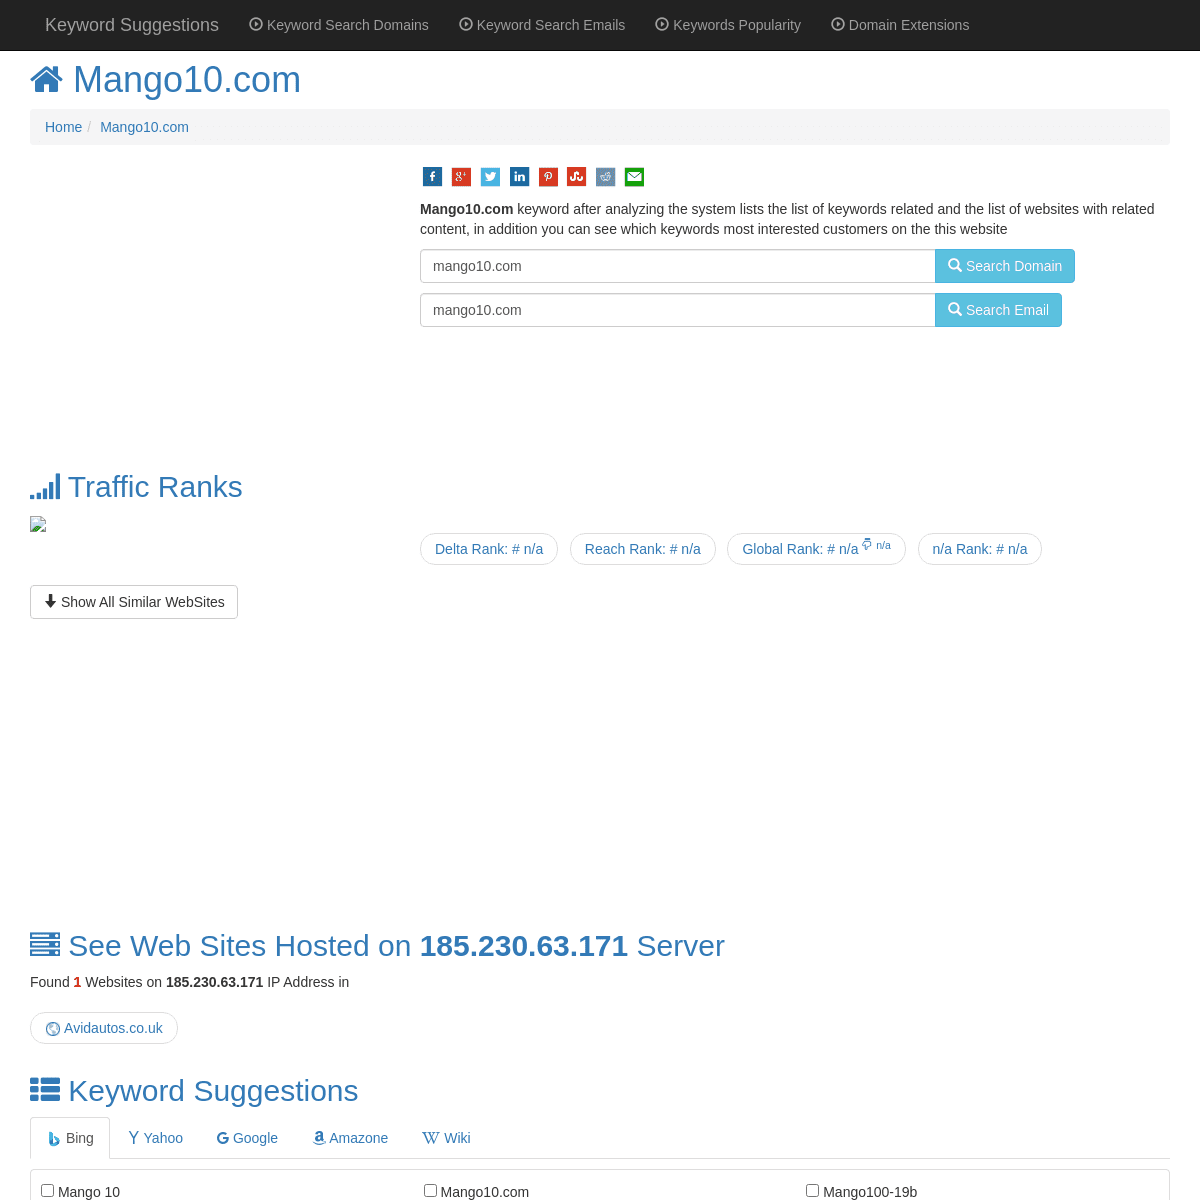 A complete backup of https://www.keyword-suggest-tool.com/search/mango10.com/